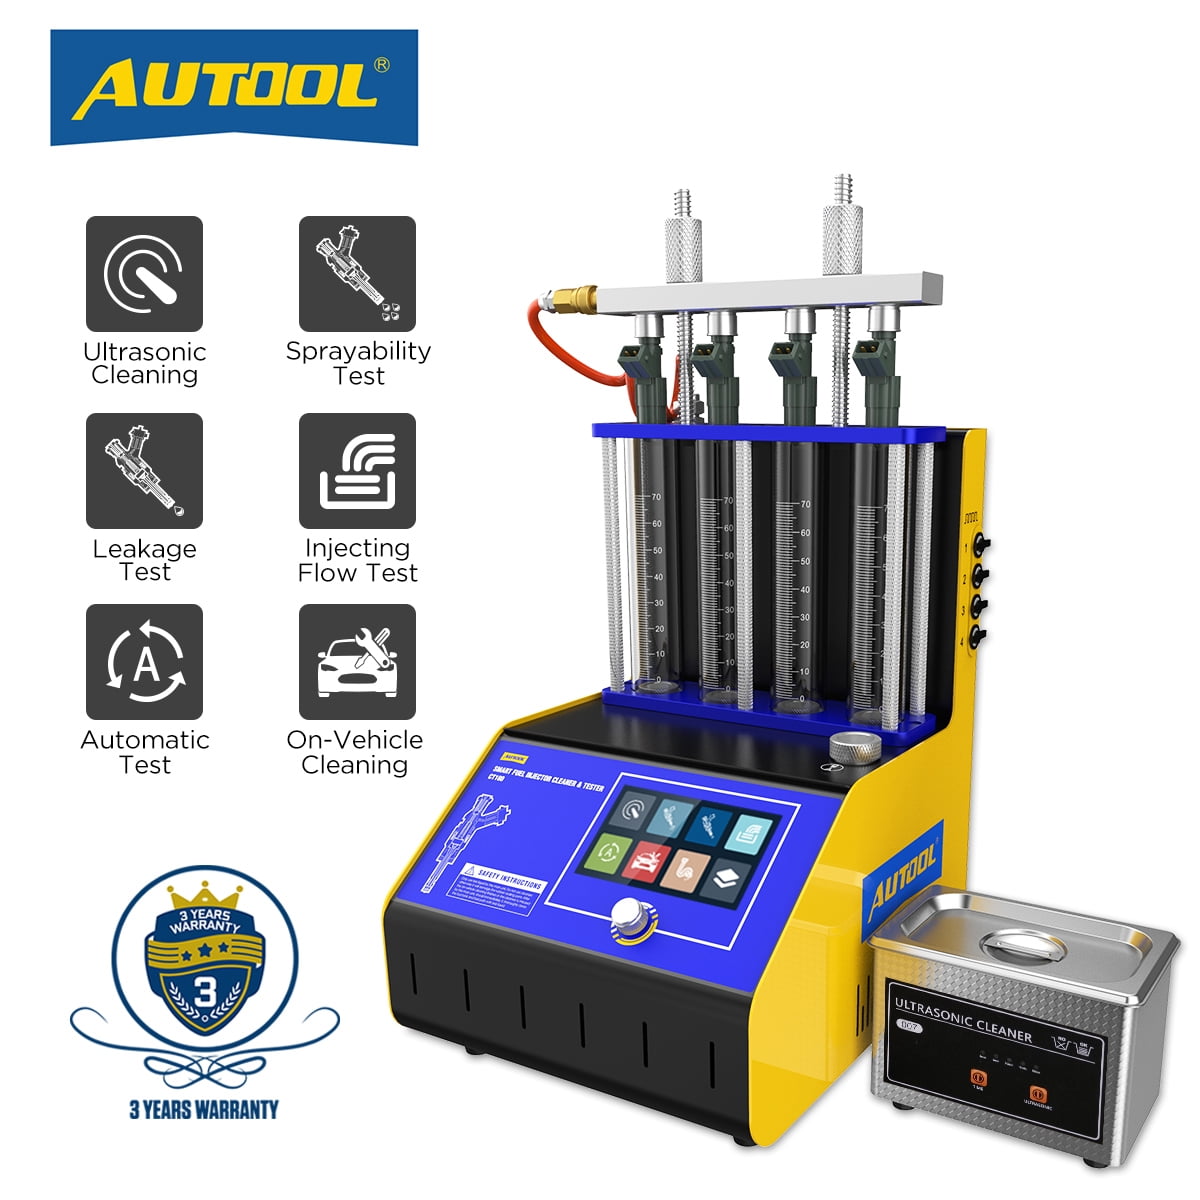 Auto Car GDI Fuel Injector Cleaner Tester 6 Cylinder Ultrasonic Cleaning Maching